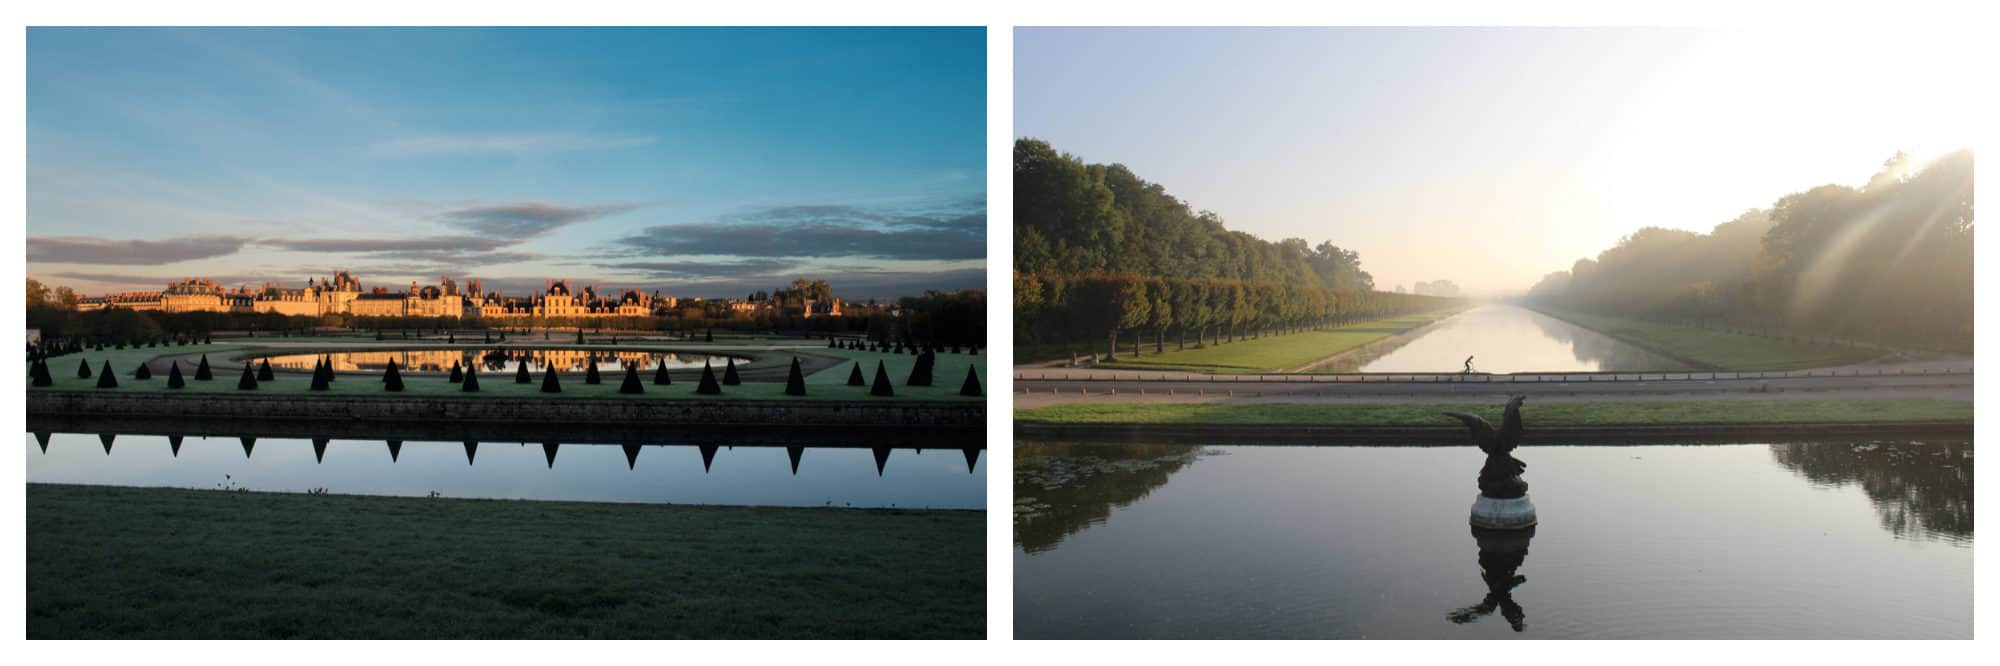 Château de Fontainebleau at sunset with the reflection of the manicured trees in the water (left). The fountain at Château de Fontainebleau in the daytime (right).